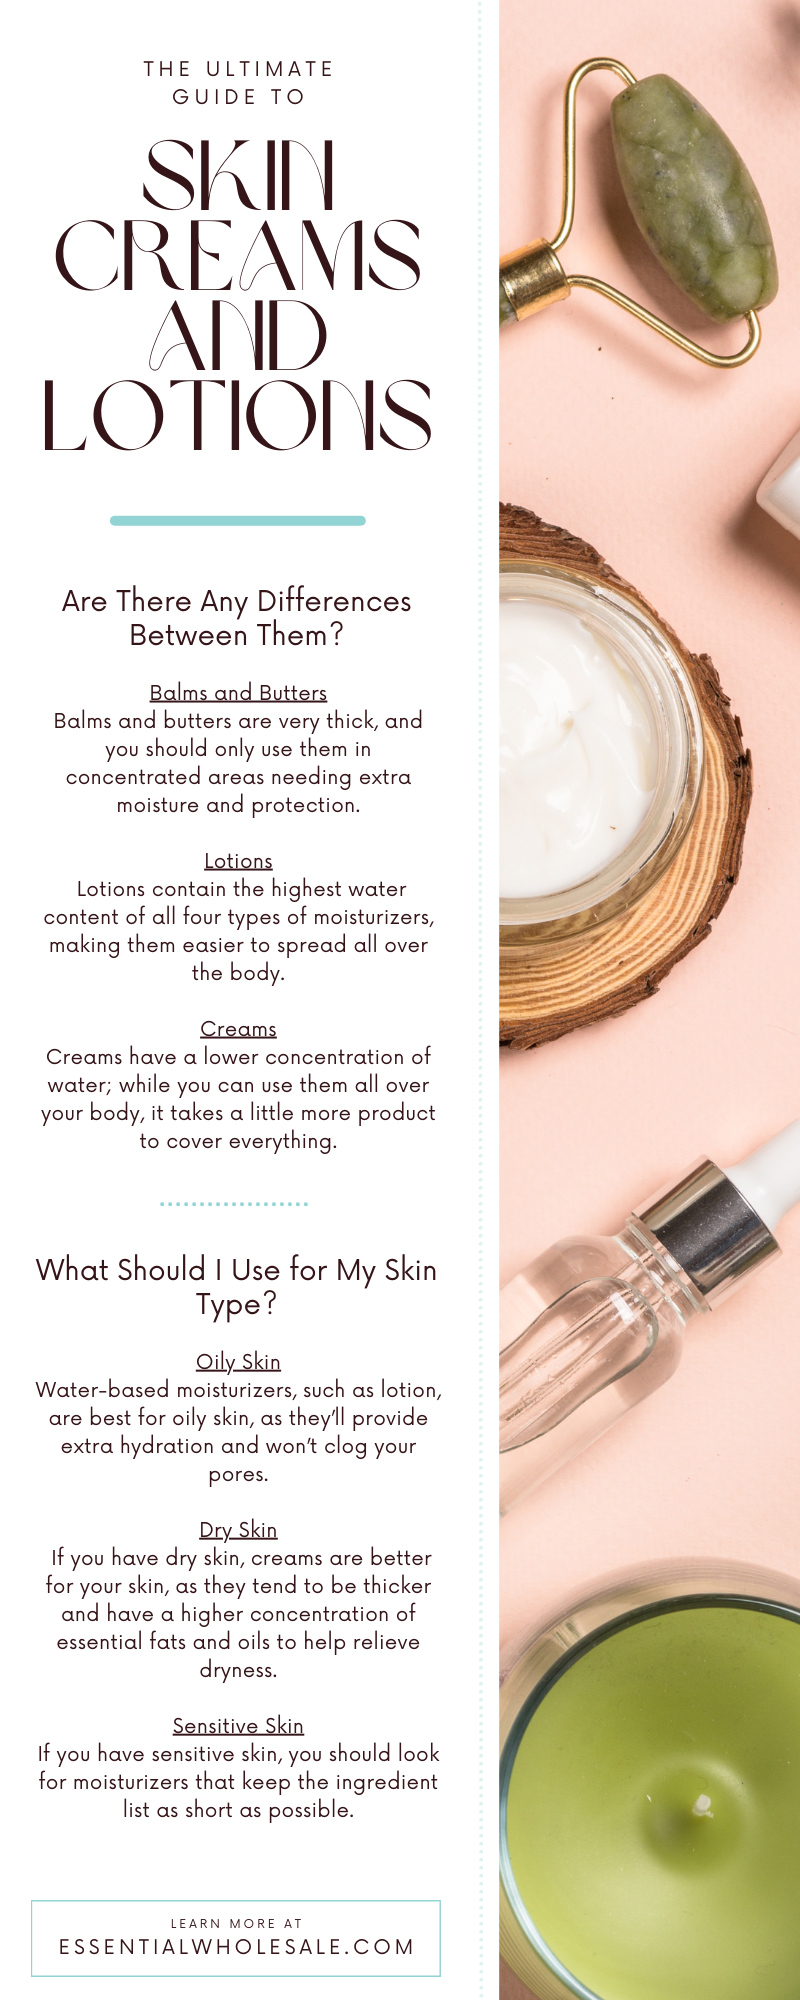 The Ultimate Guide to Skin Creams and Lotions